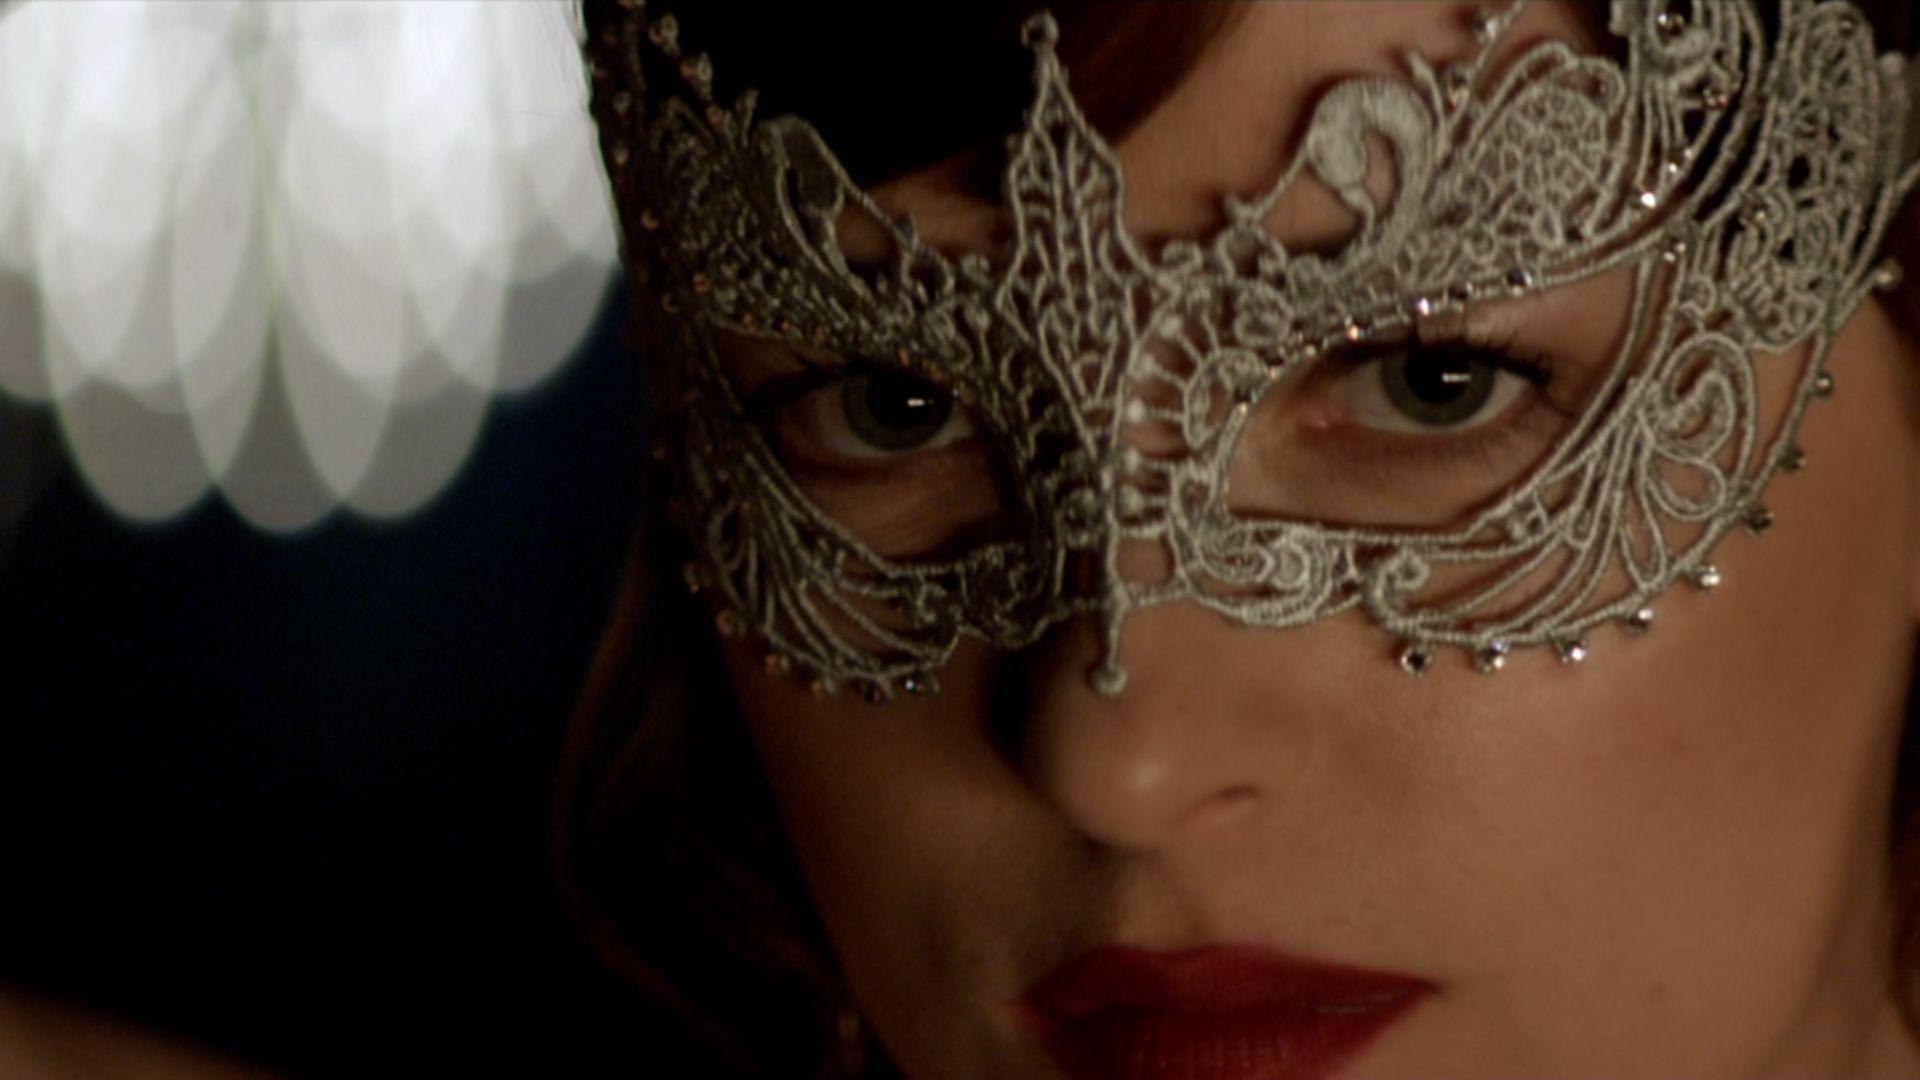 Fifty Shades Darker' trailer is sexier and more dangerous than